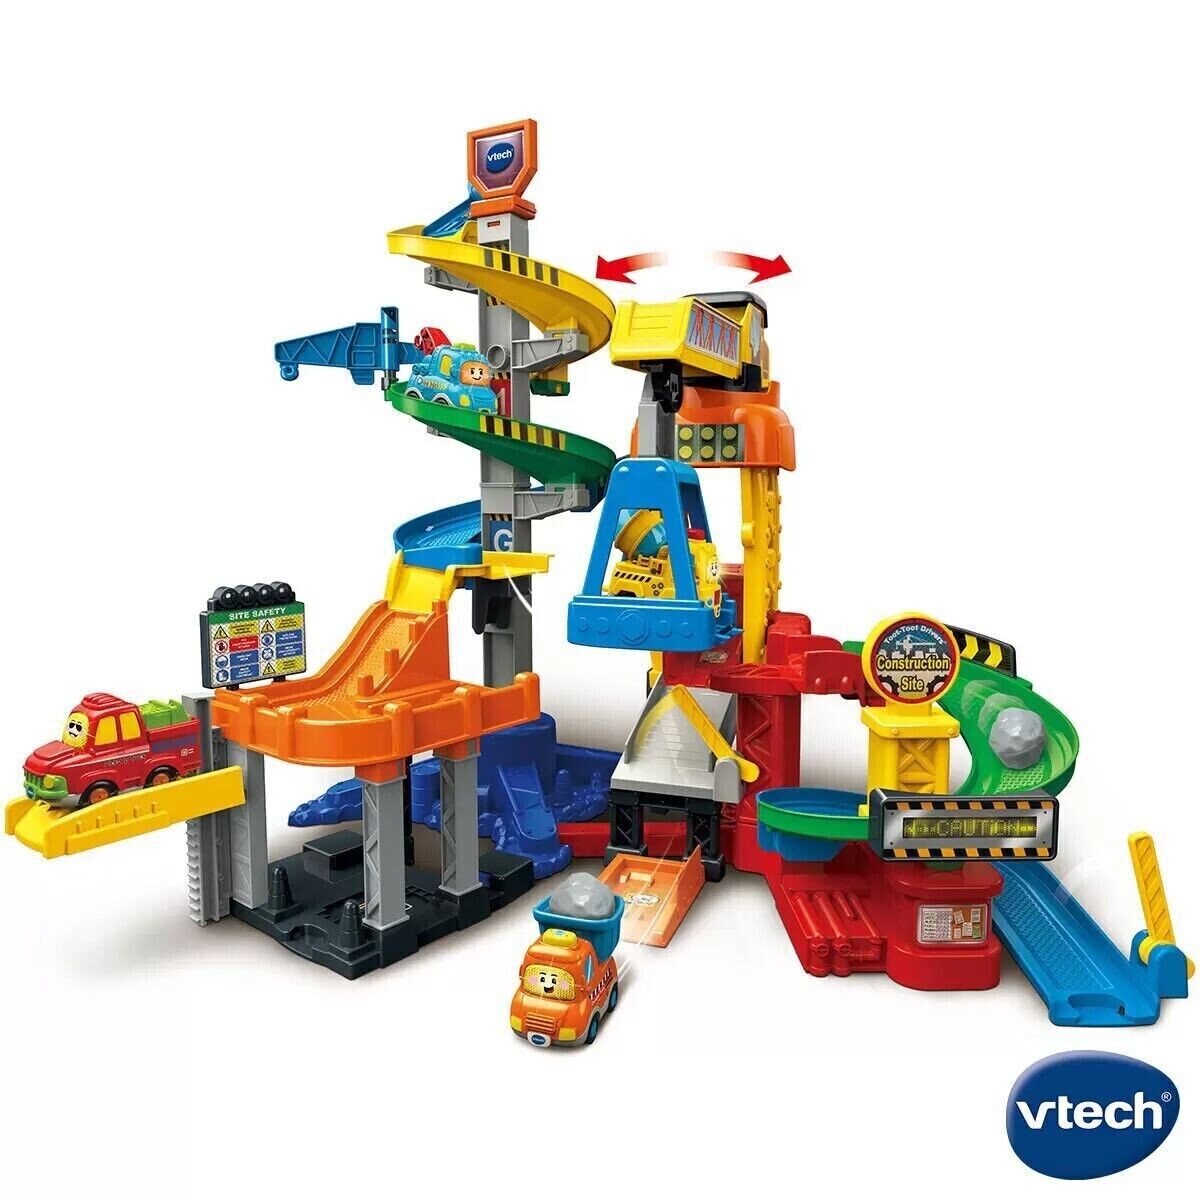 VTech Toot Toot Drivers Construction Set (1+ Years)